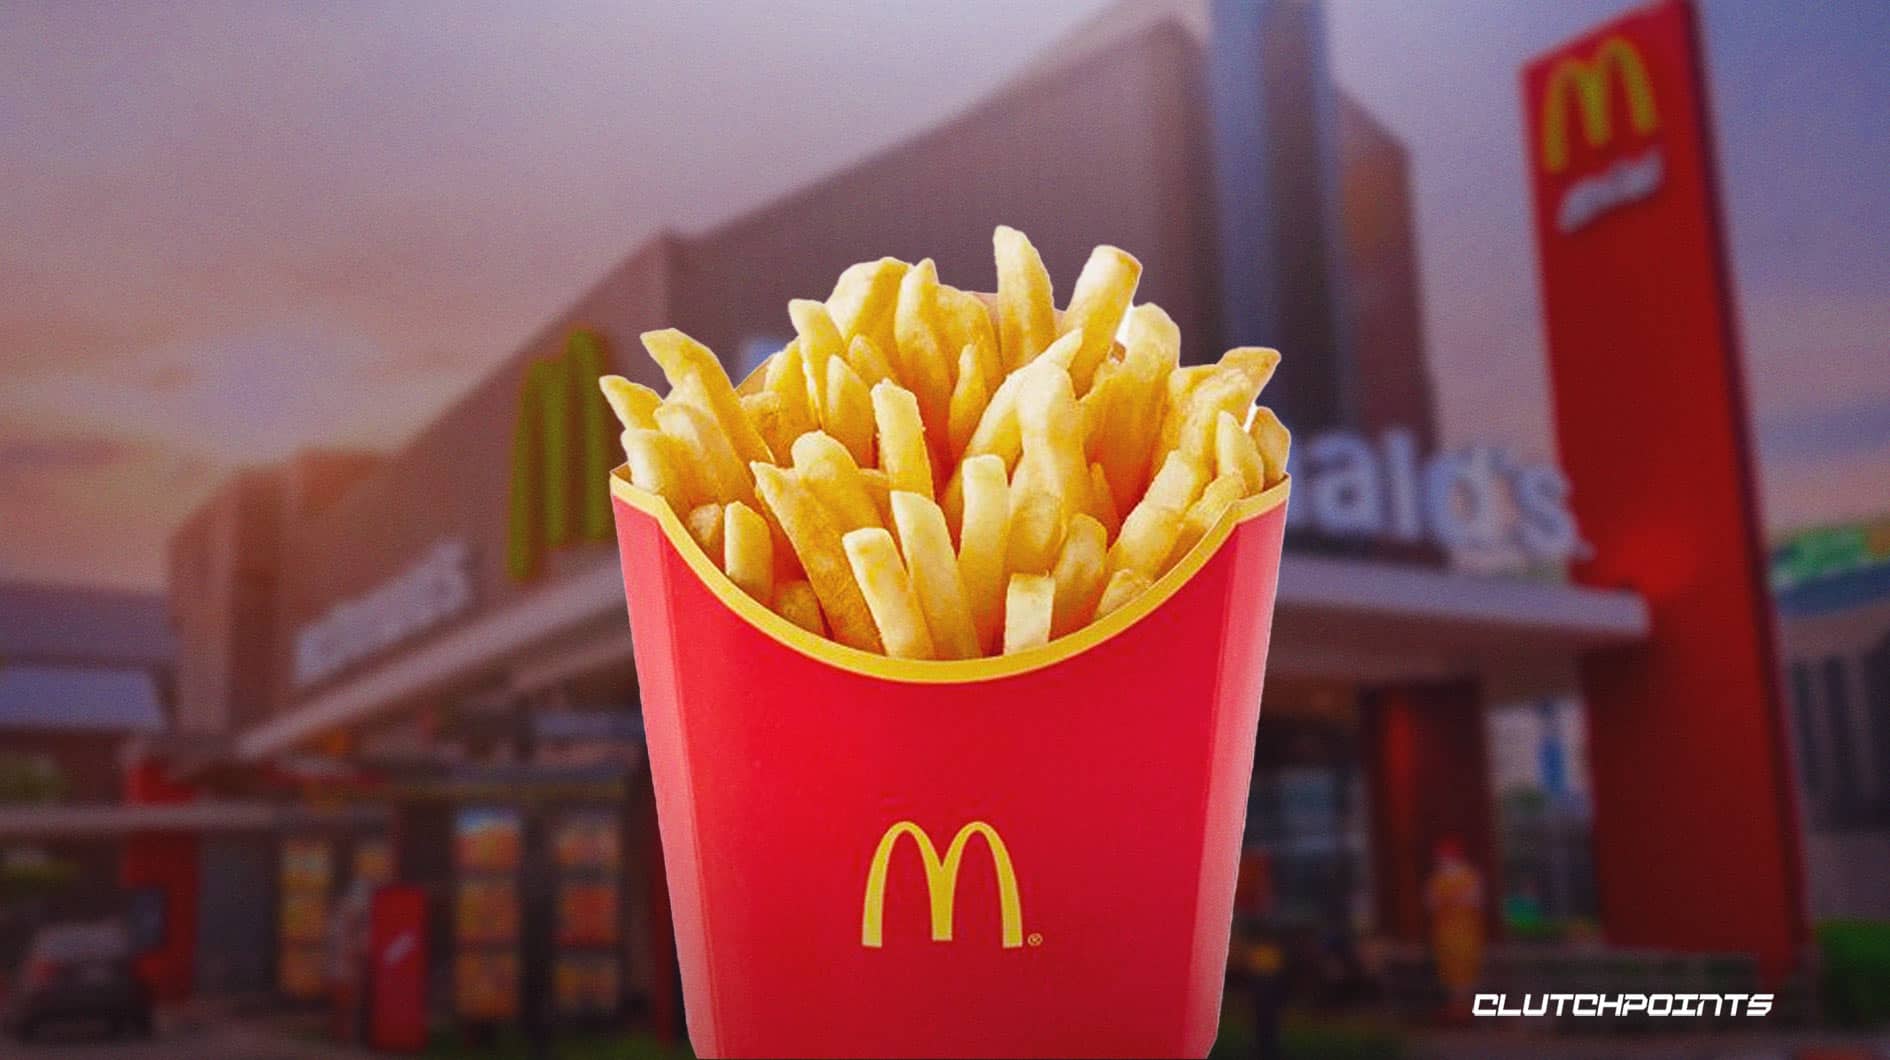 McDonalds giving free fries Thursday for National French Fry Day